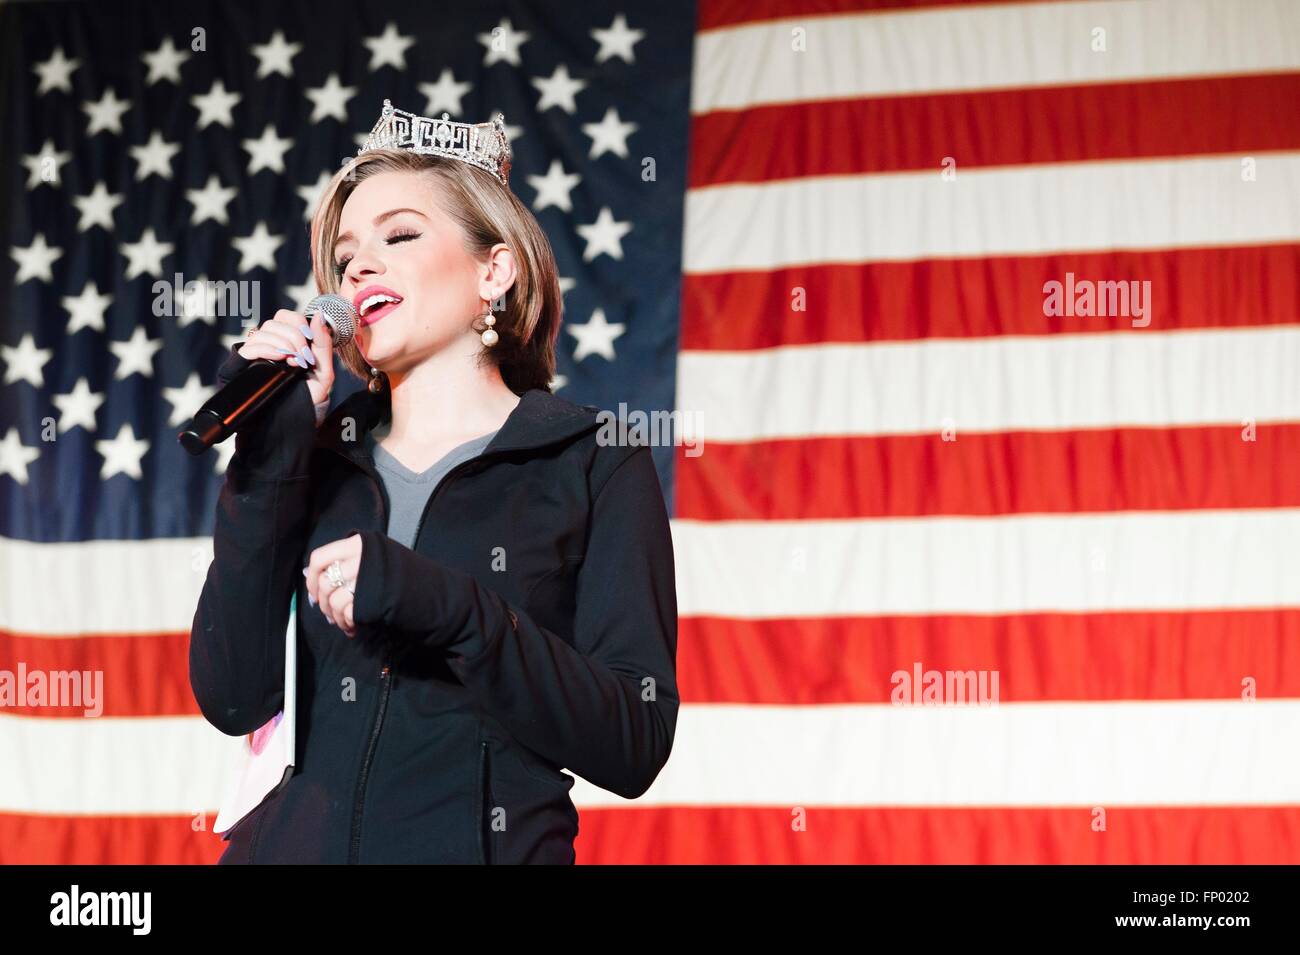 Betty Cantrell, Miss America 2016, sings for the troops in front of a giant American flag during a visit to service members as part of the USO Spring Tour at Joint Base Elmendorf-Richardson March 12, 2016 in Alaska. Stock Photo